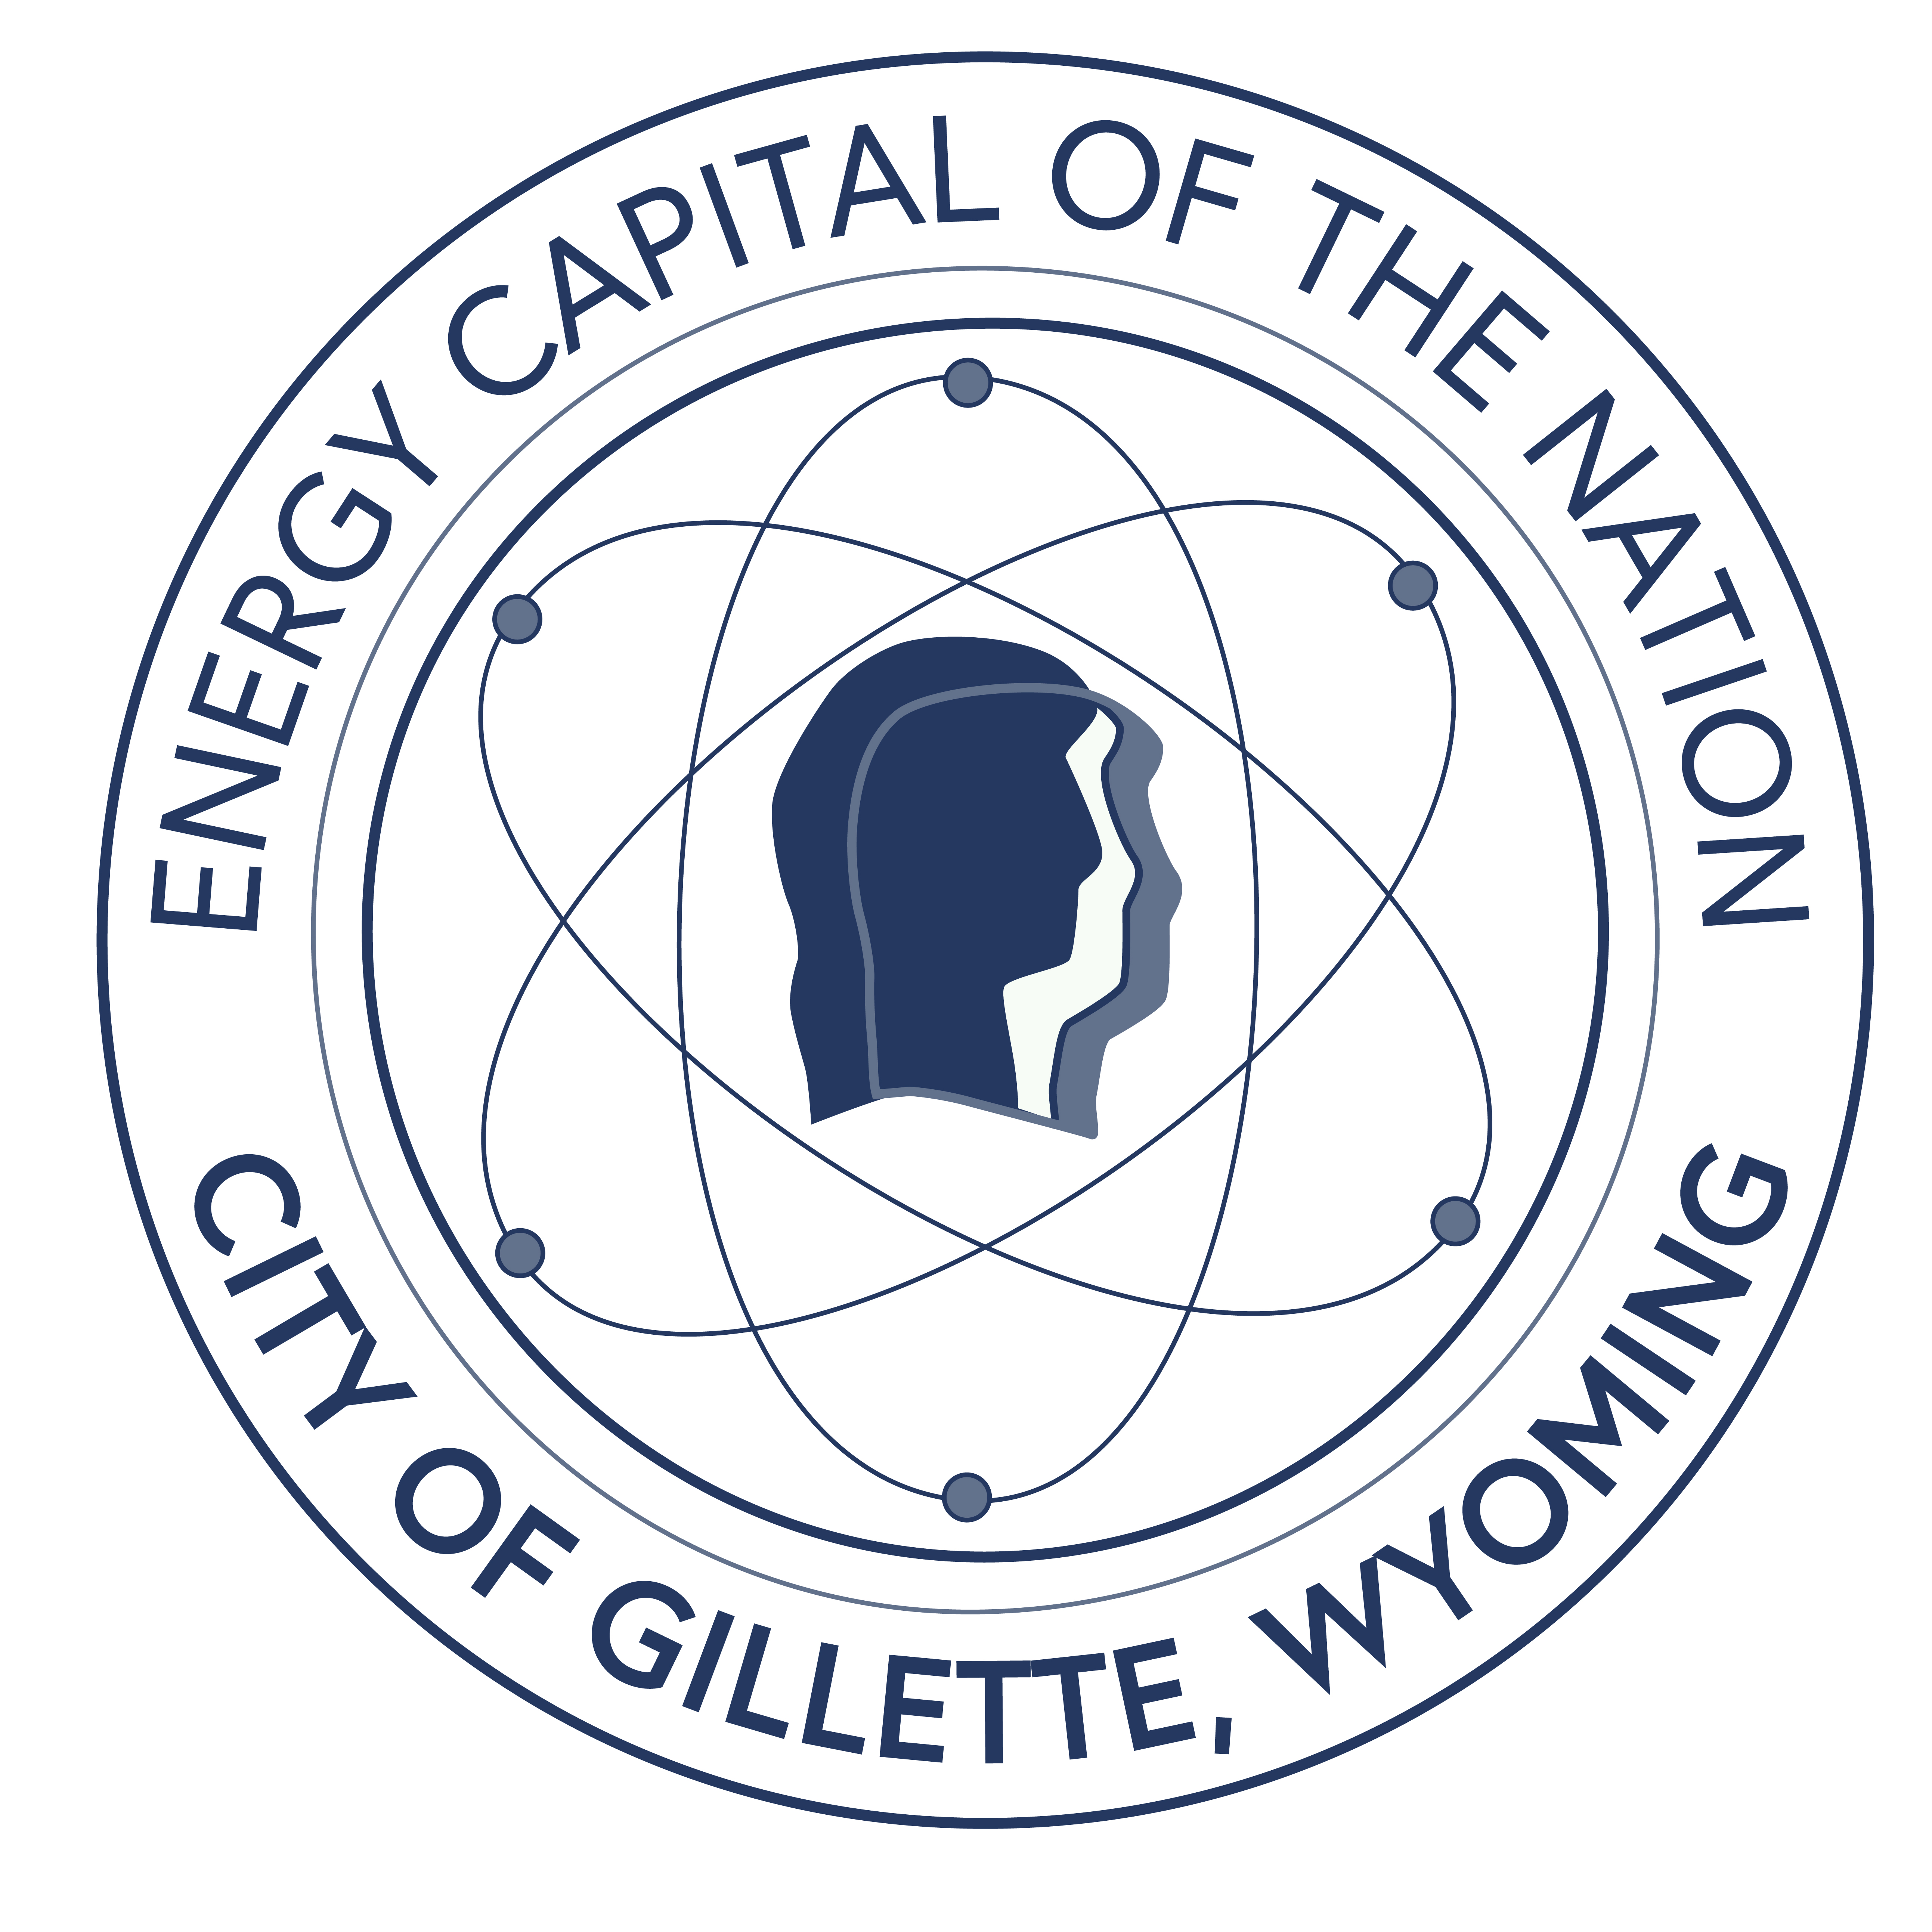 City of Gillette, Wyoming